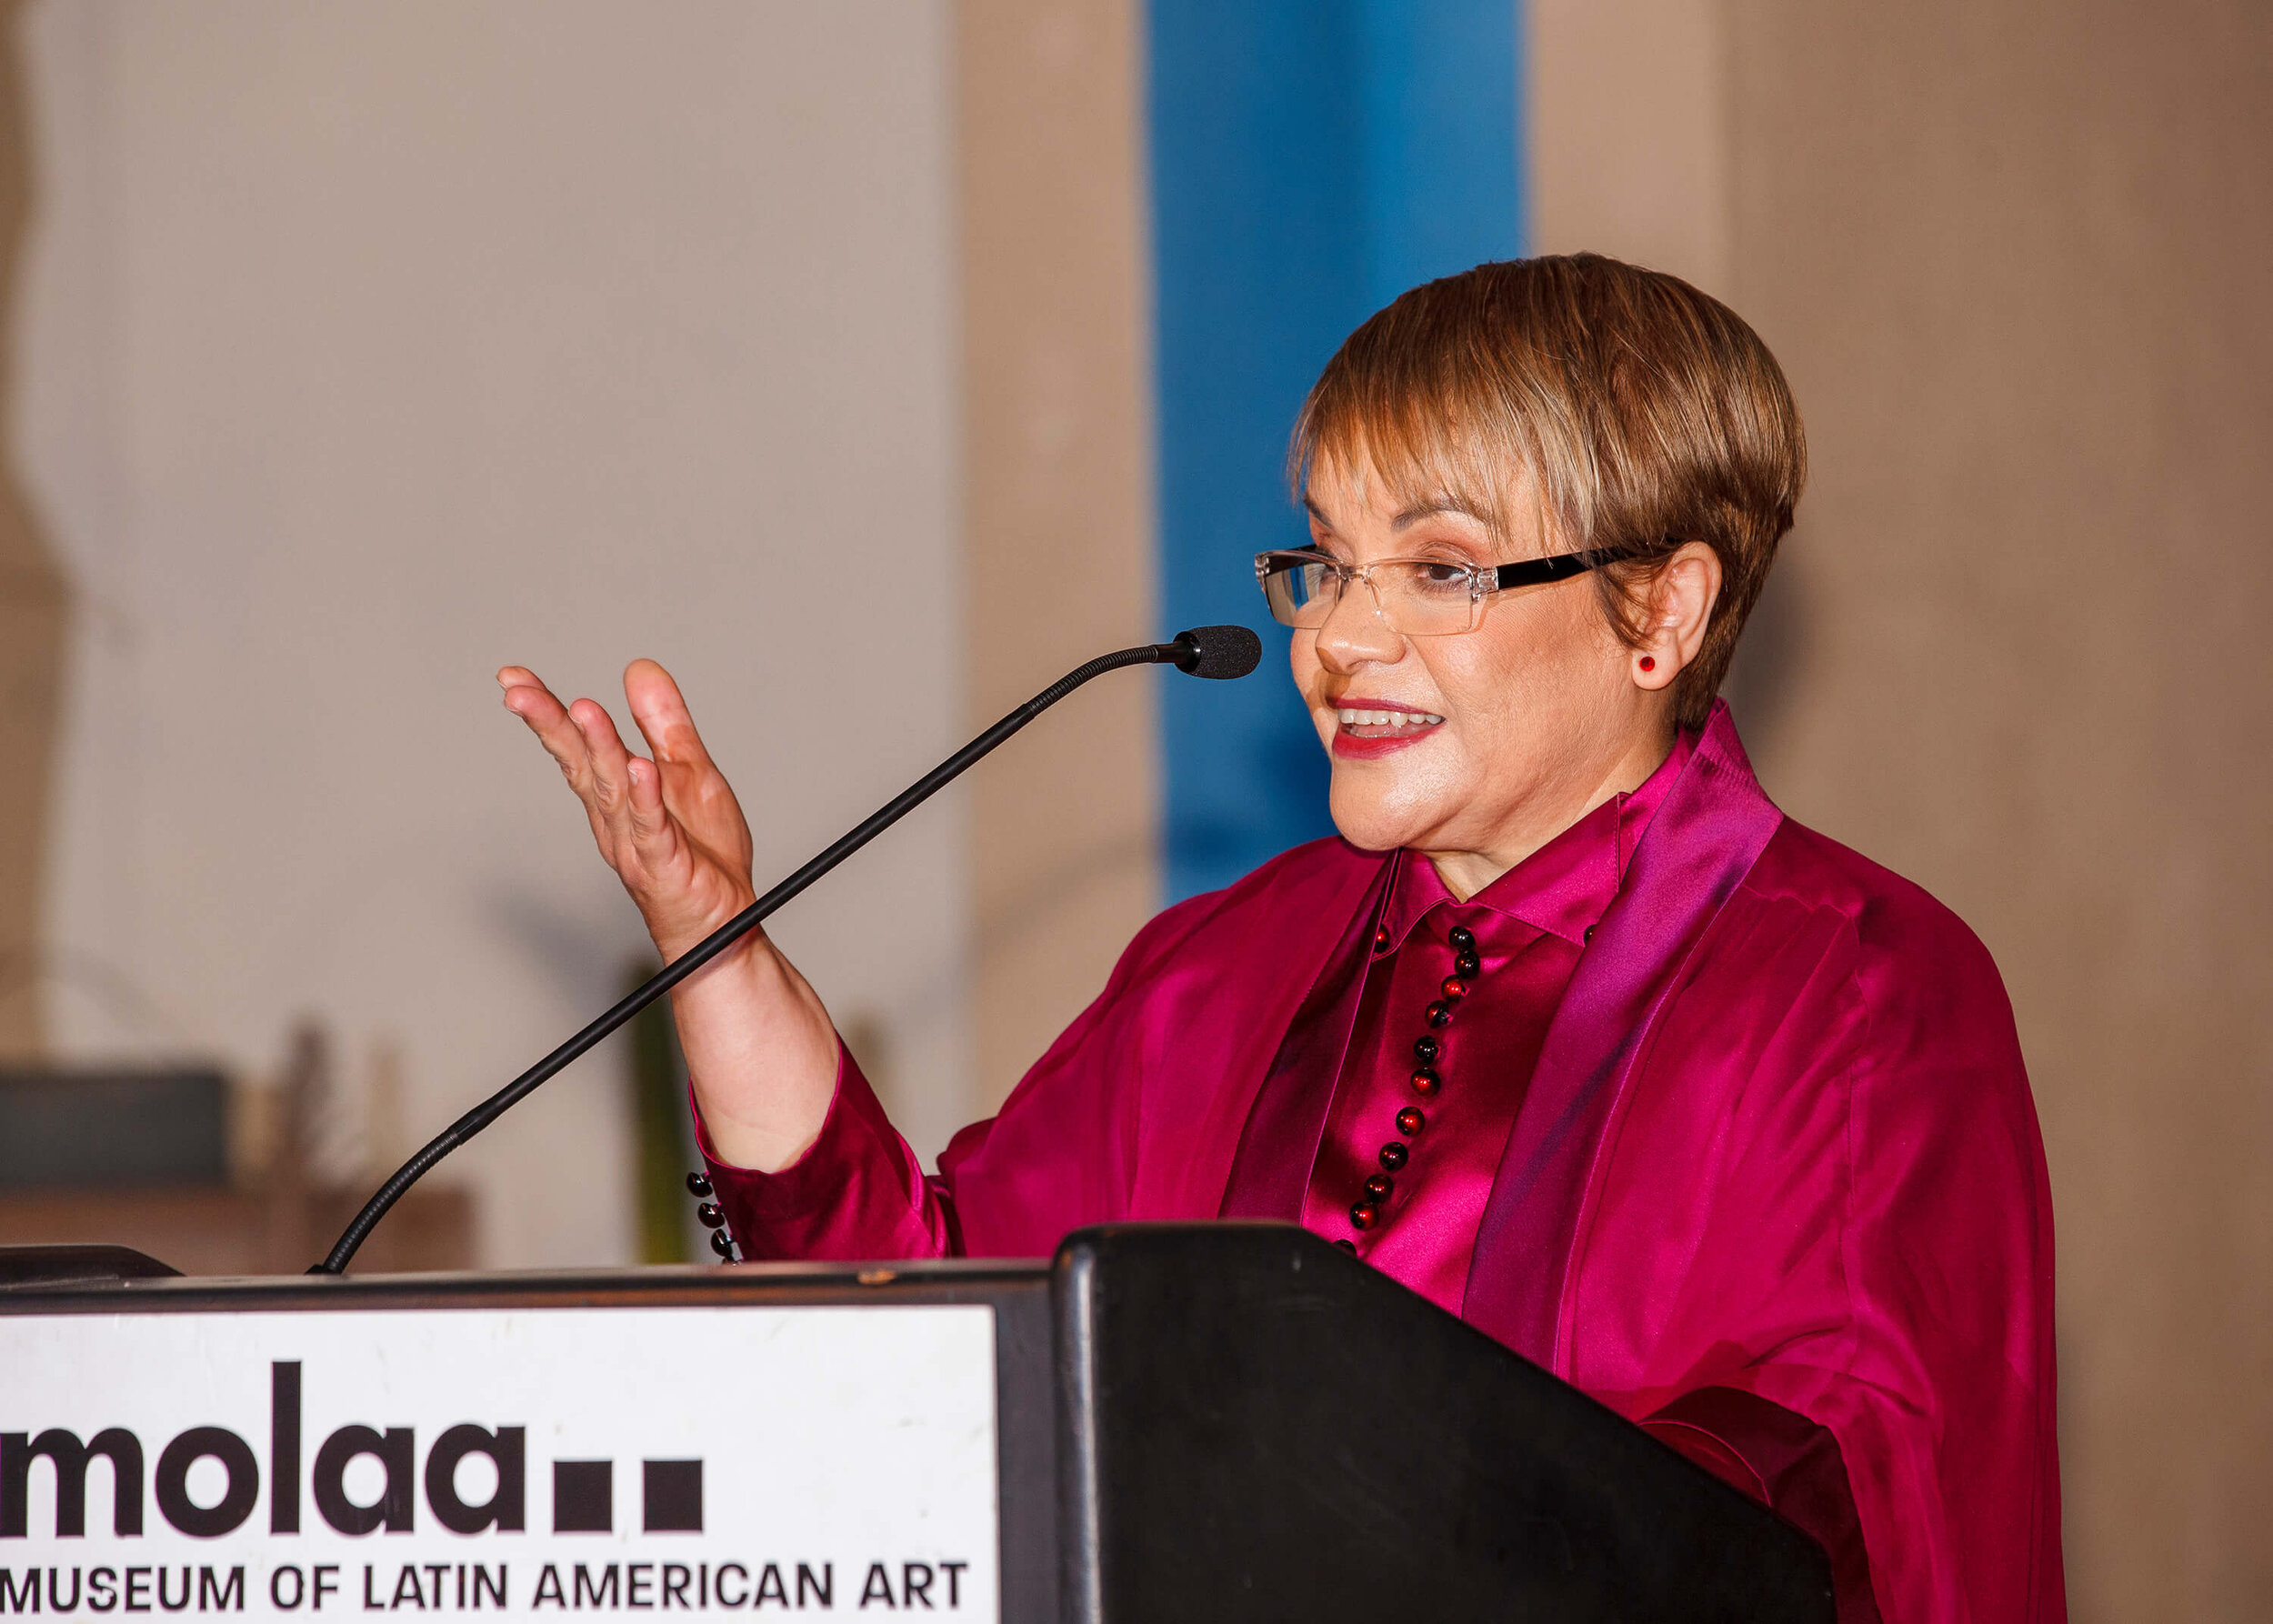  MOLAA’s President &amp; CEO, Lourdes I. Ramos-Rivas, Ph.D. speaking at MOLAA’s Annual Gala, 2019. Photo by Justin Galligher. 